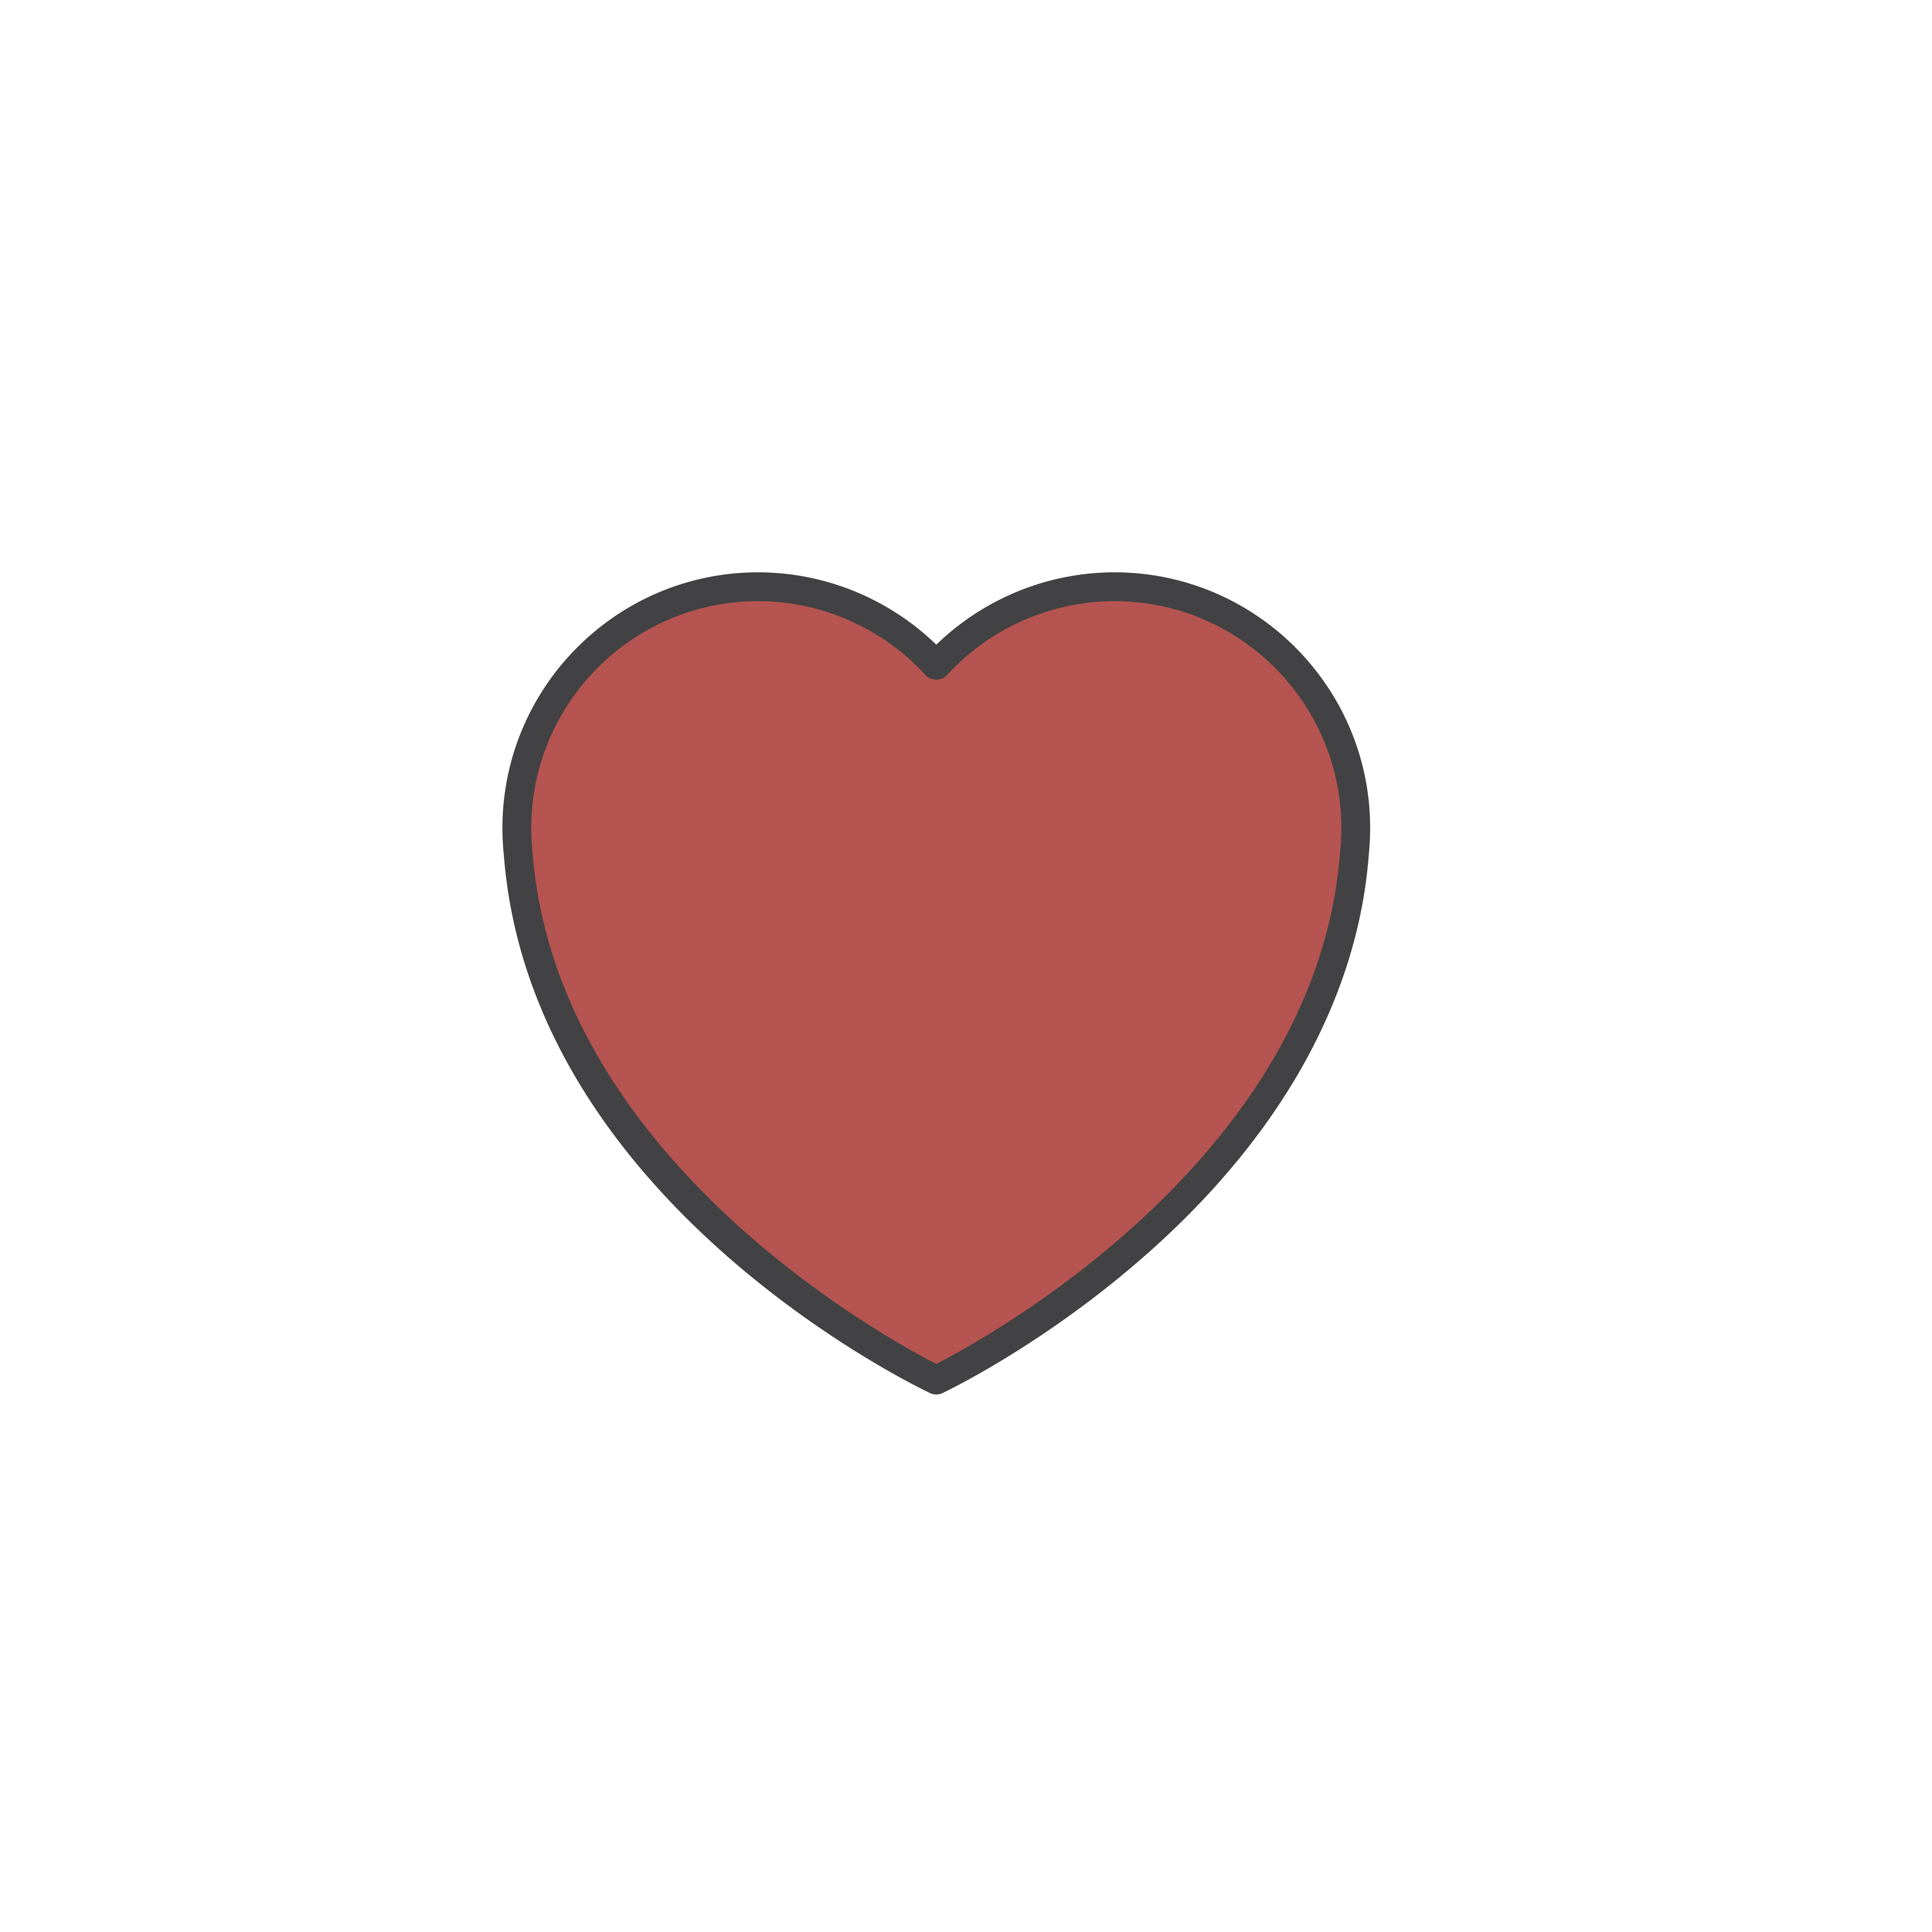 heart vector image free download